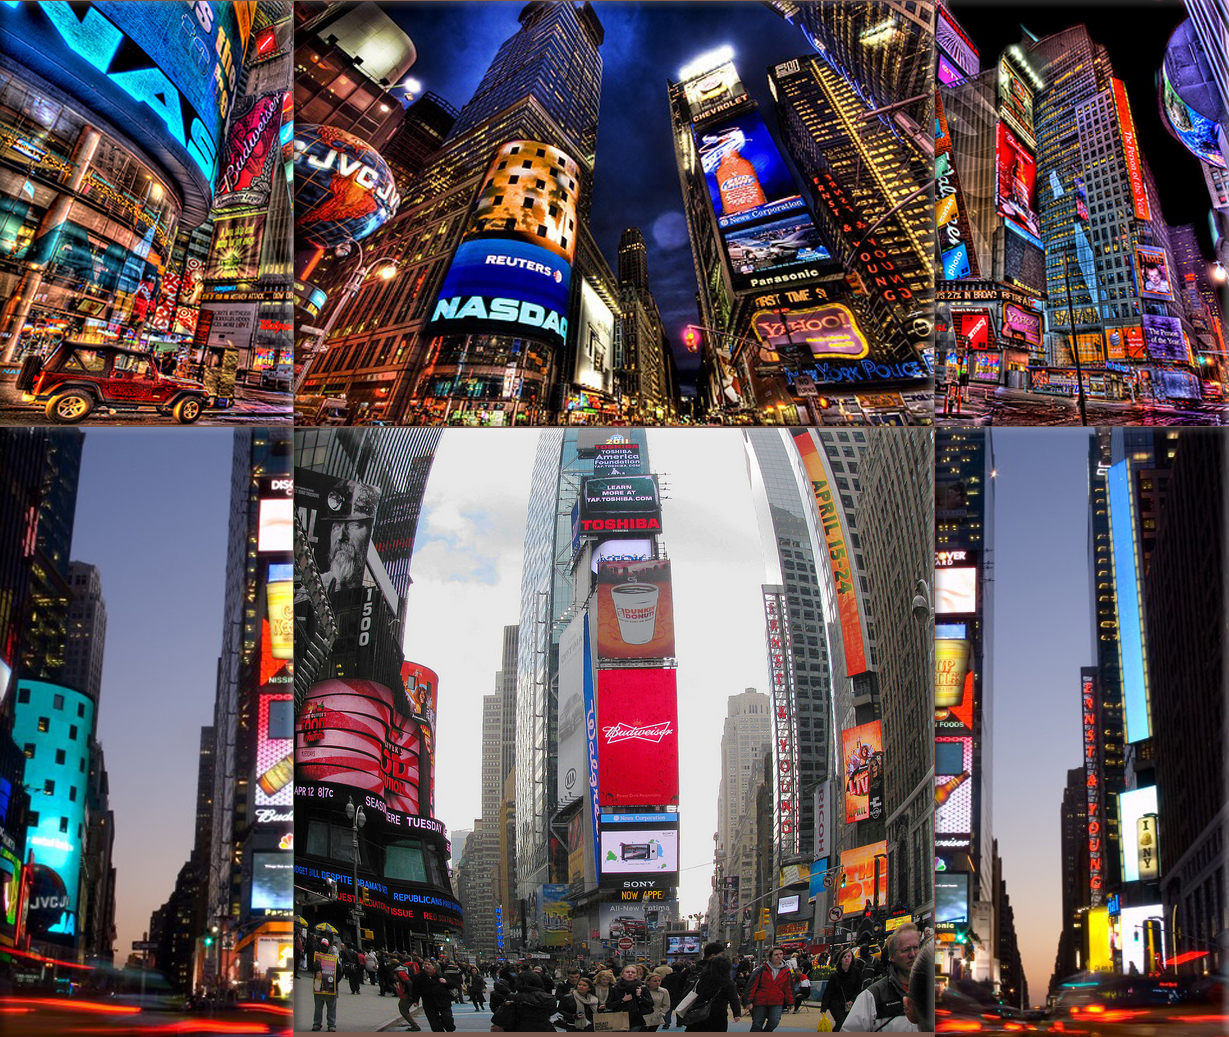  Longacre Square in Midtown Manhattan is renamed Times Square after The New York Times on April 8th, 1904